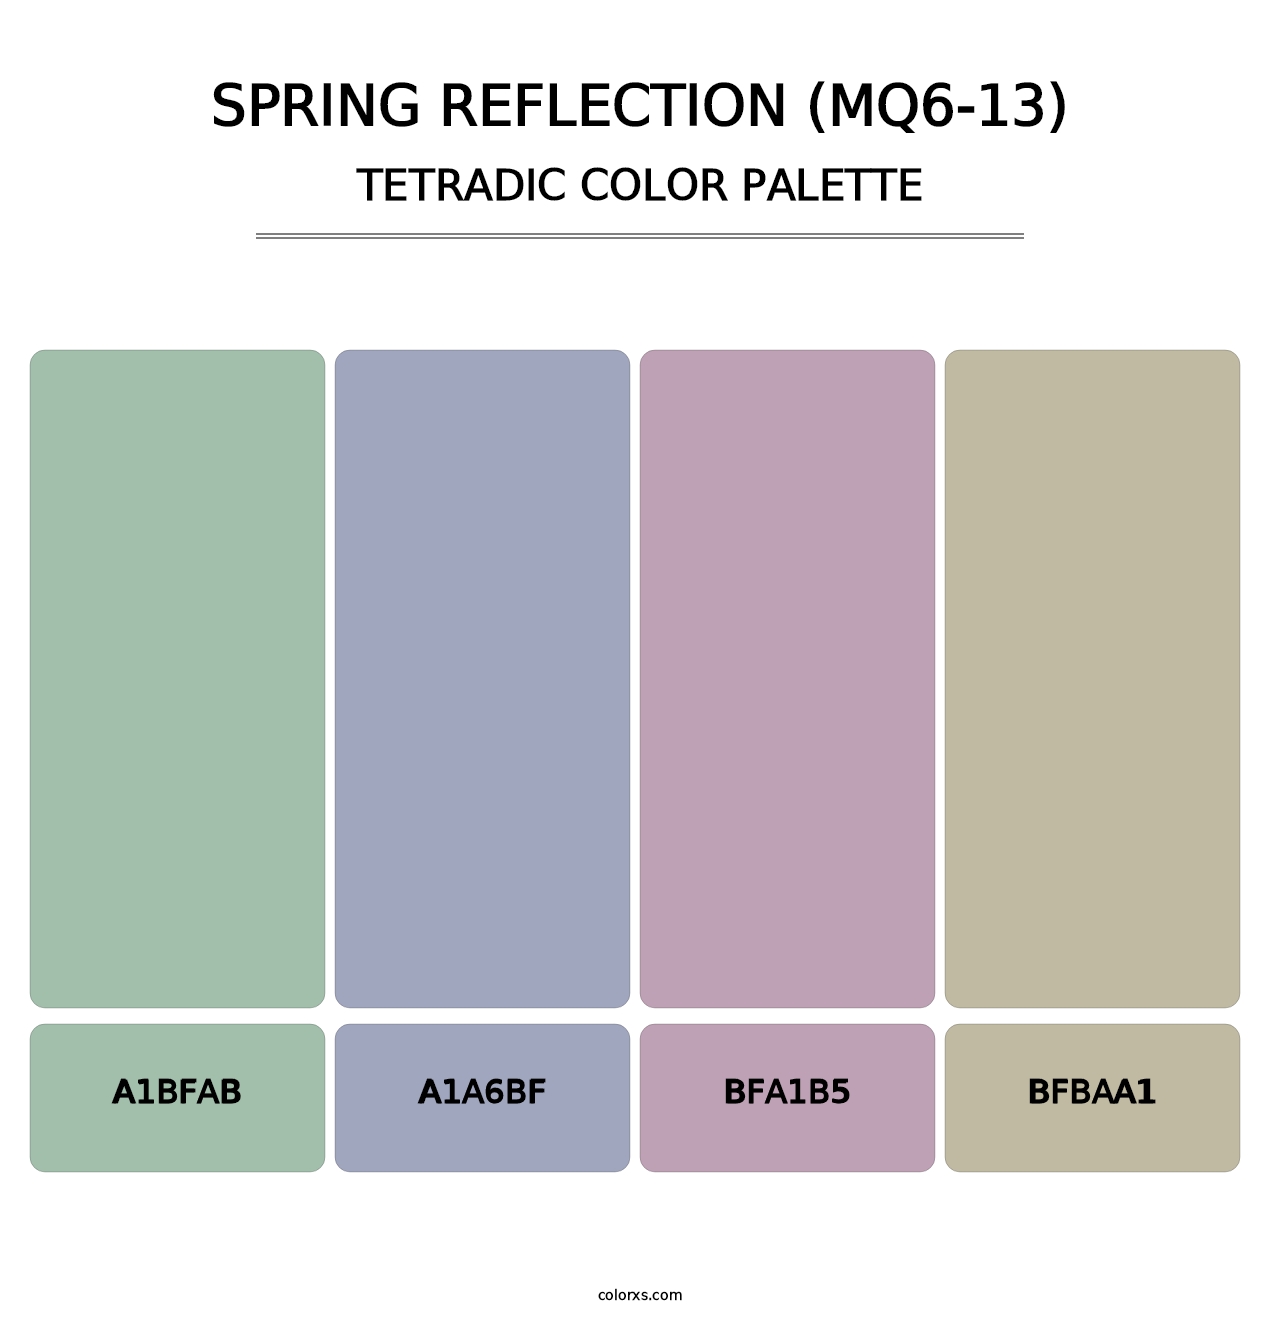 Spring Reflection (MQ6-13) - Tetradic Color Palette